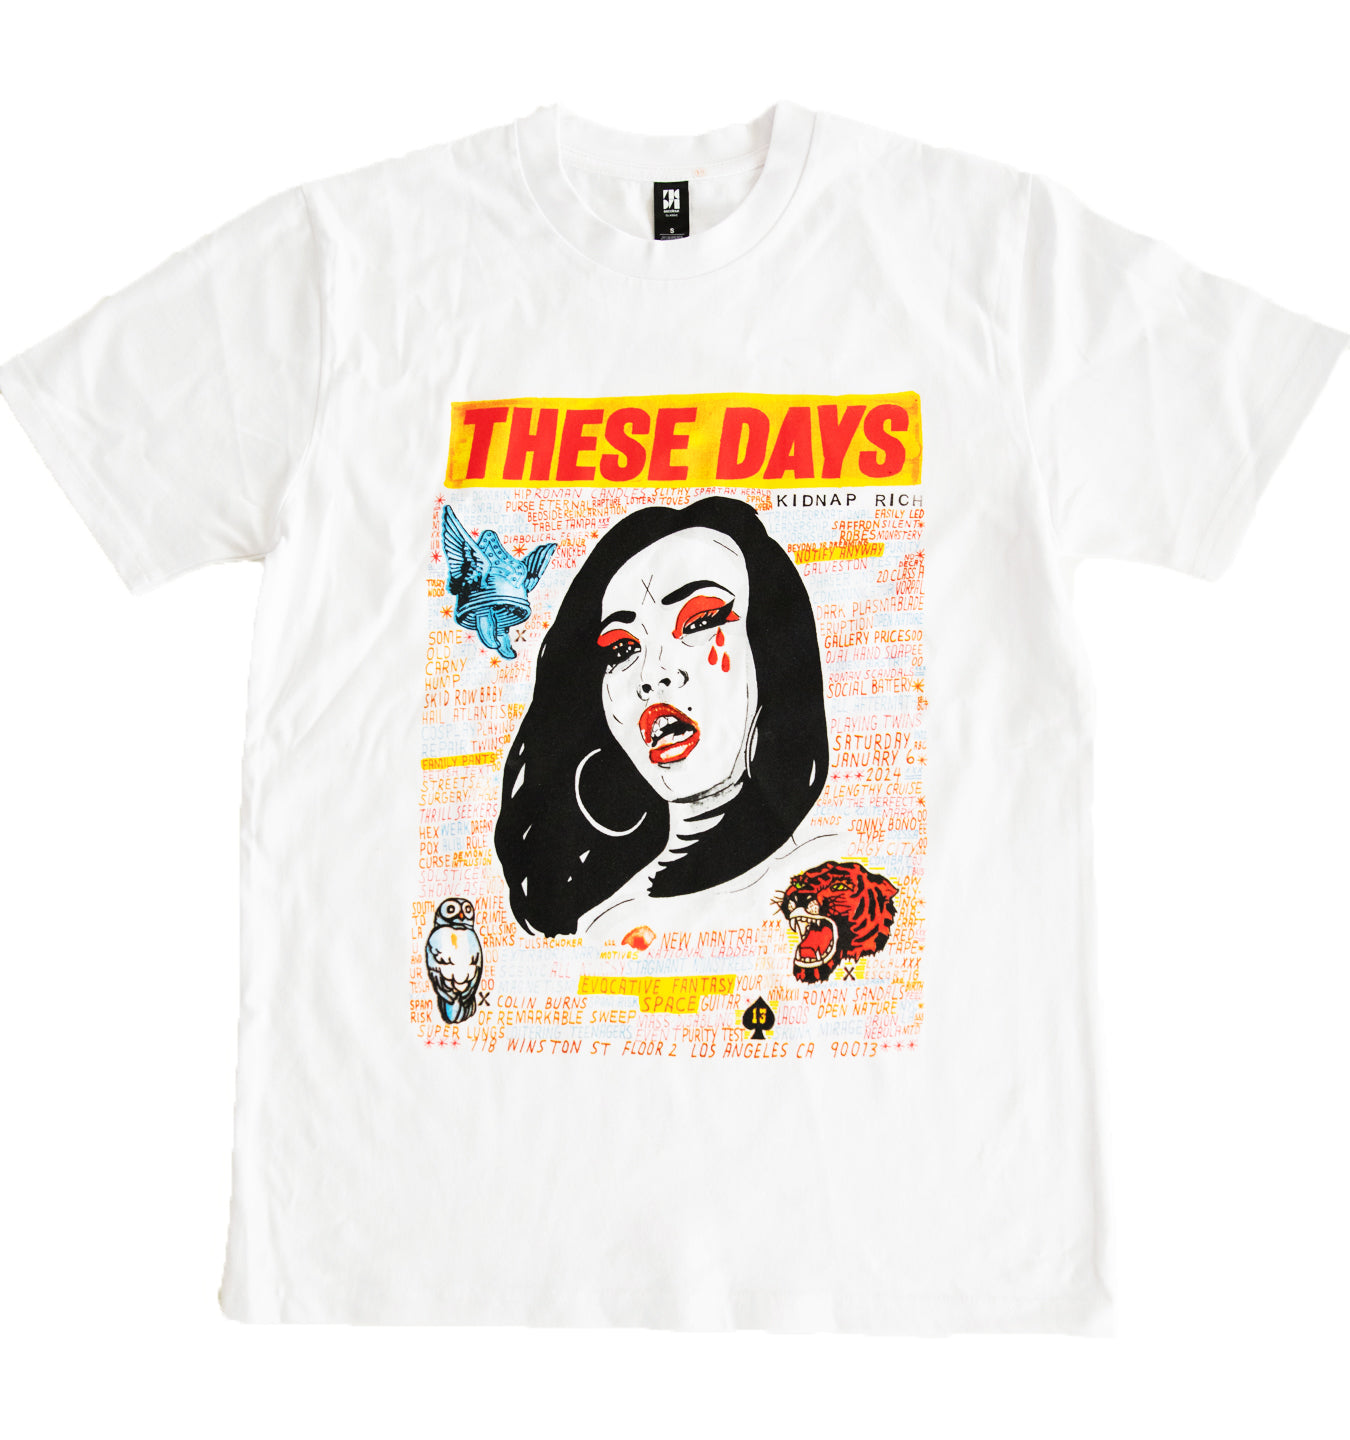 COLIN BURNS | These Days t-shirt